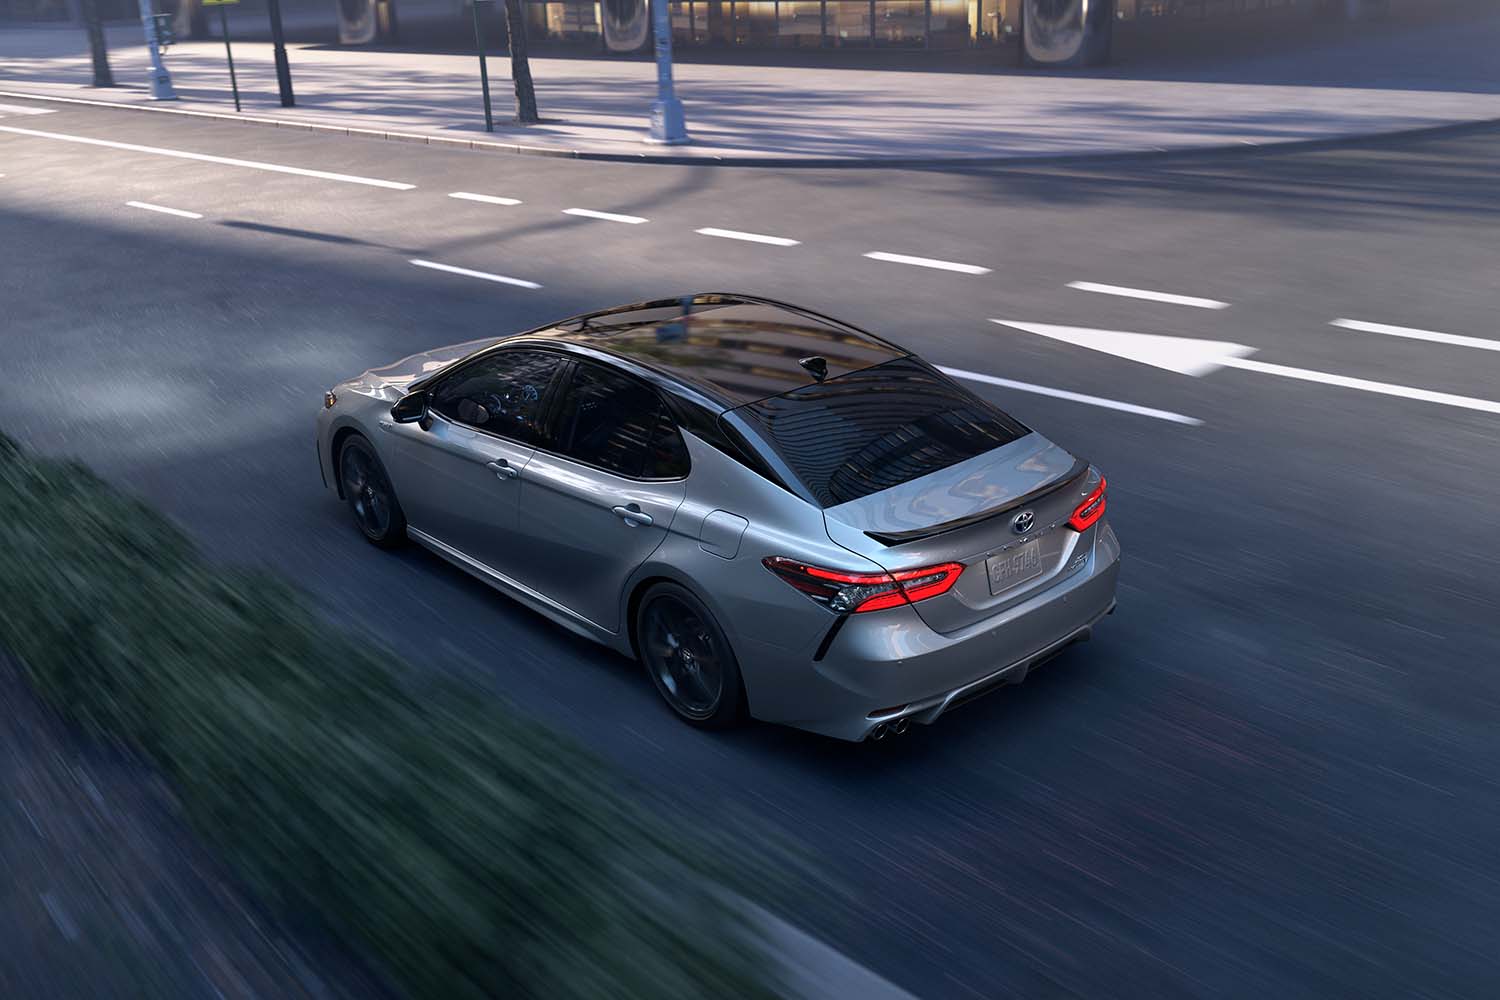 Toyota Hybrid for Everyone at Bennett Toyota | 2022 Toyota Camry Hybrid rear driving through the town